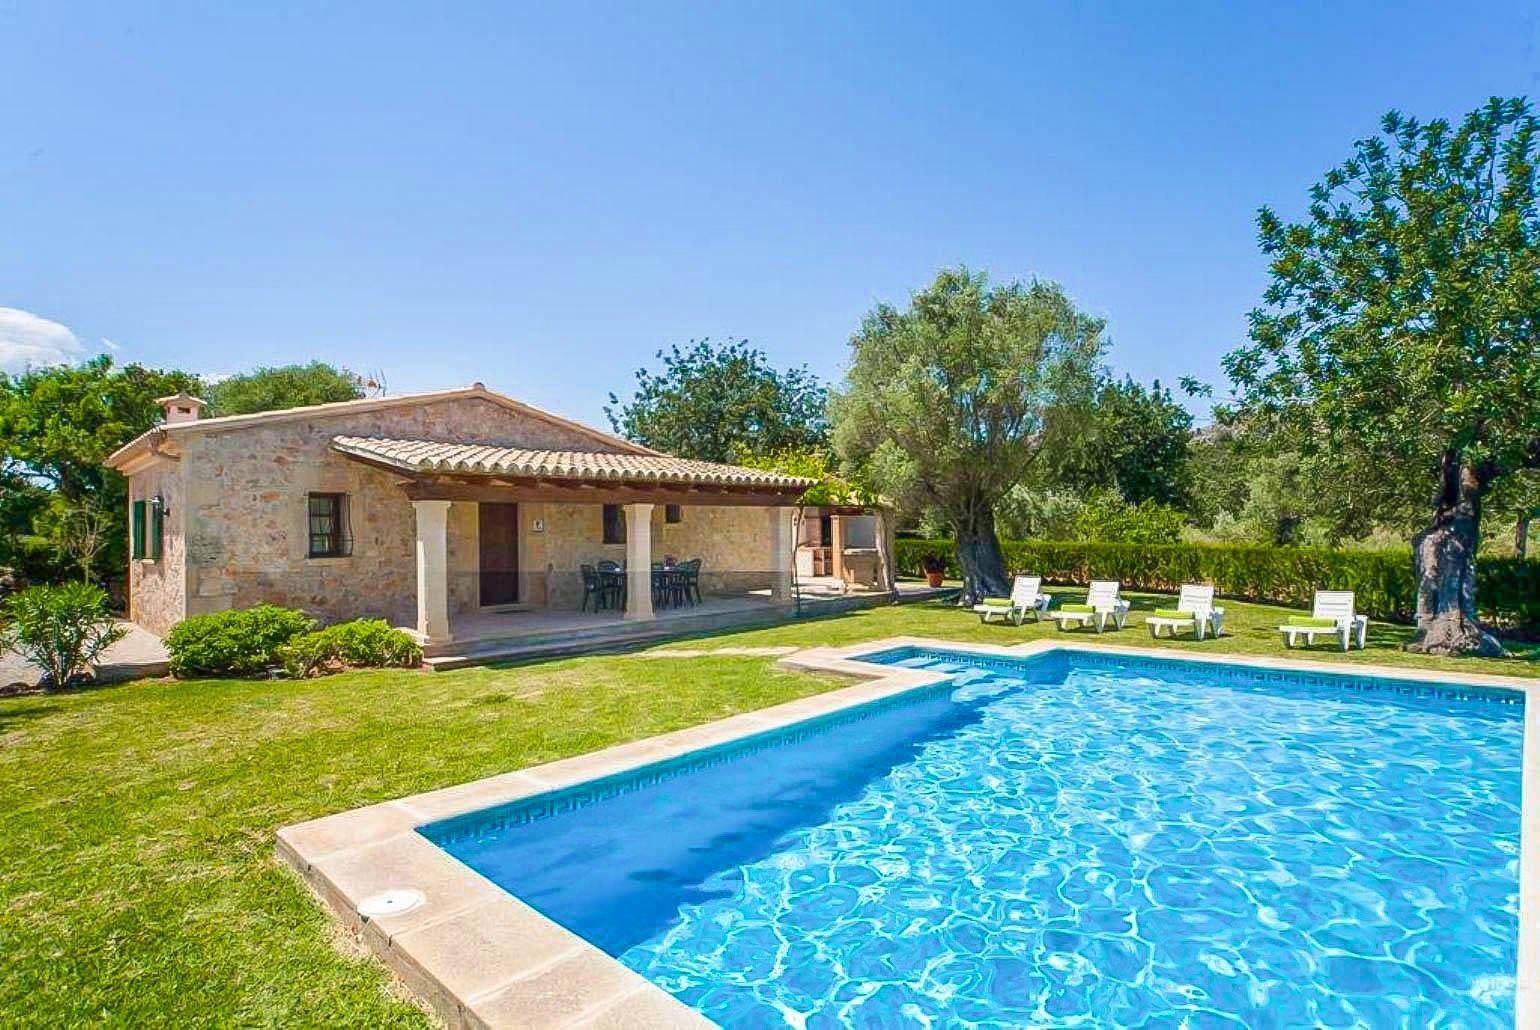 Beautiful Villa with Private Pool, Terrace and Garden area